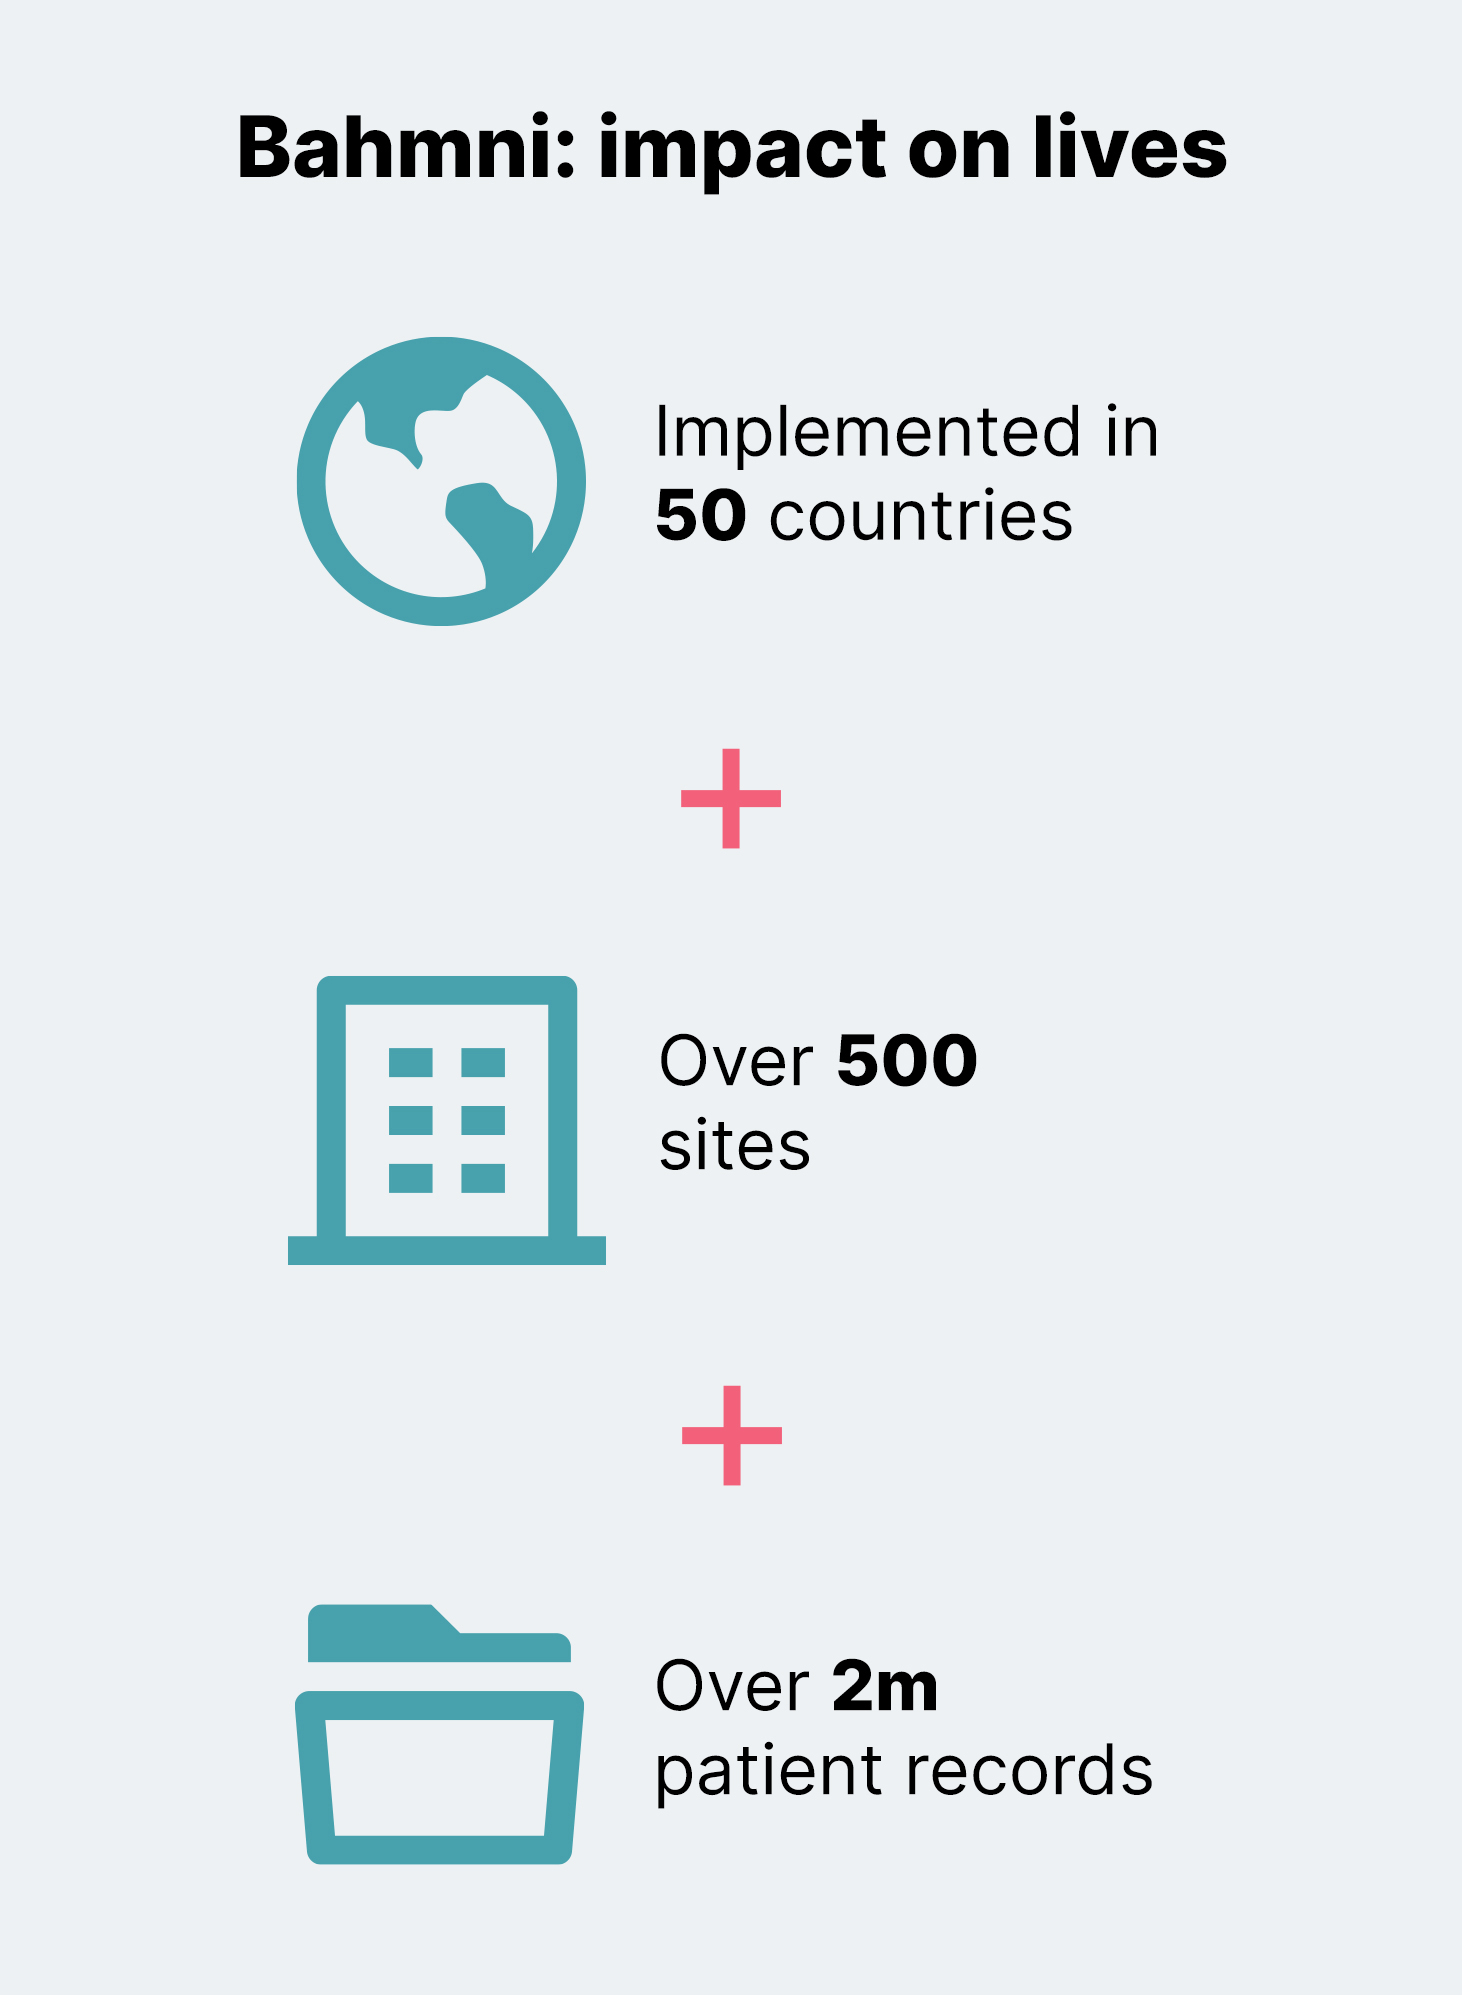 Infographic showing Bahmni's impact: Implemented in 50 countries, at over 500 hospital sites, with over 2 million patient records